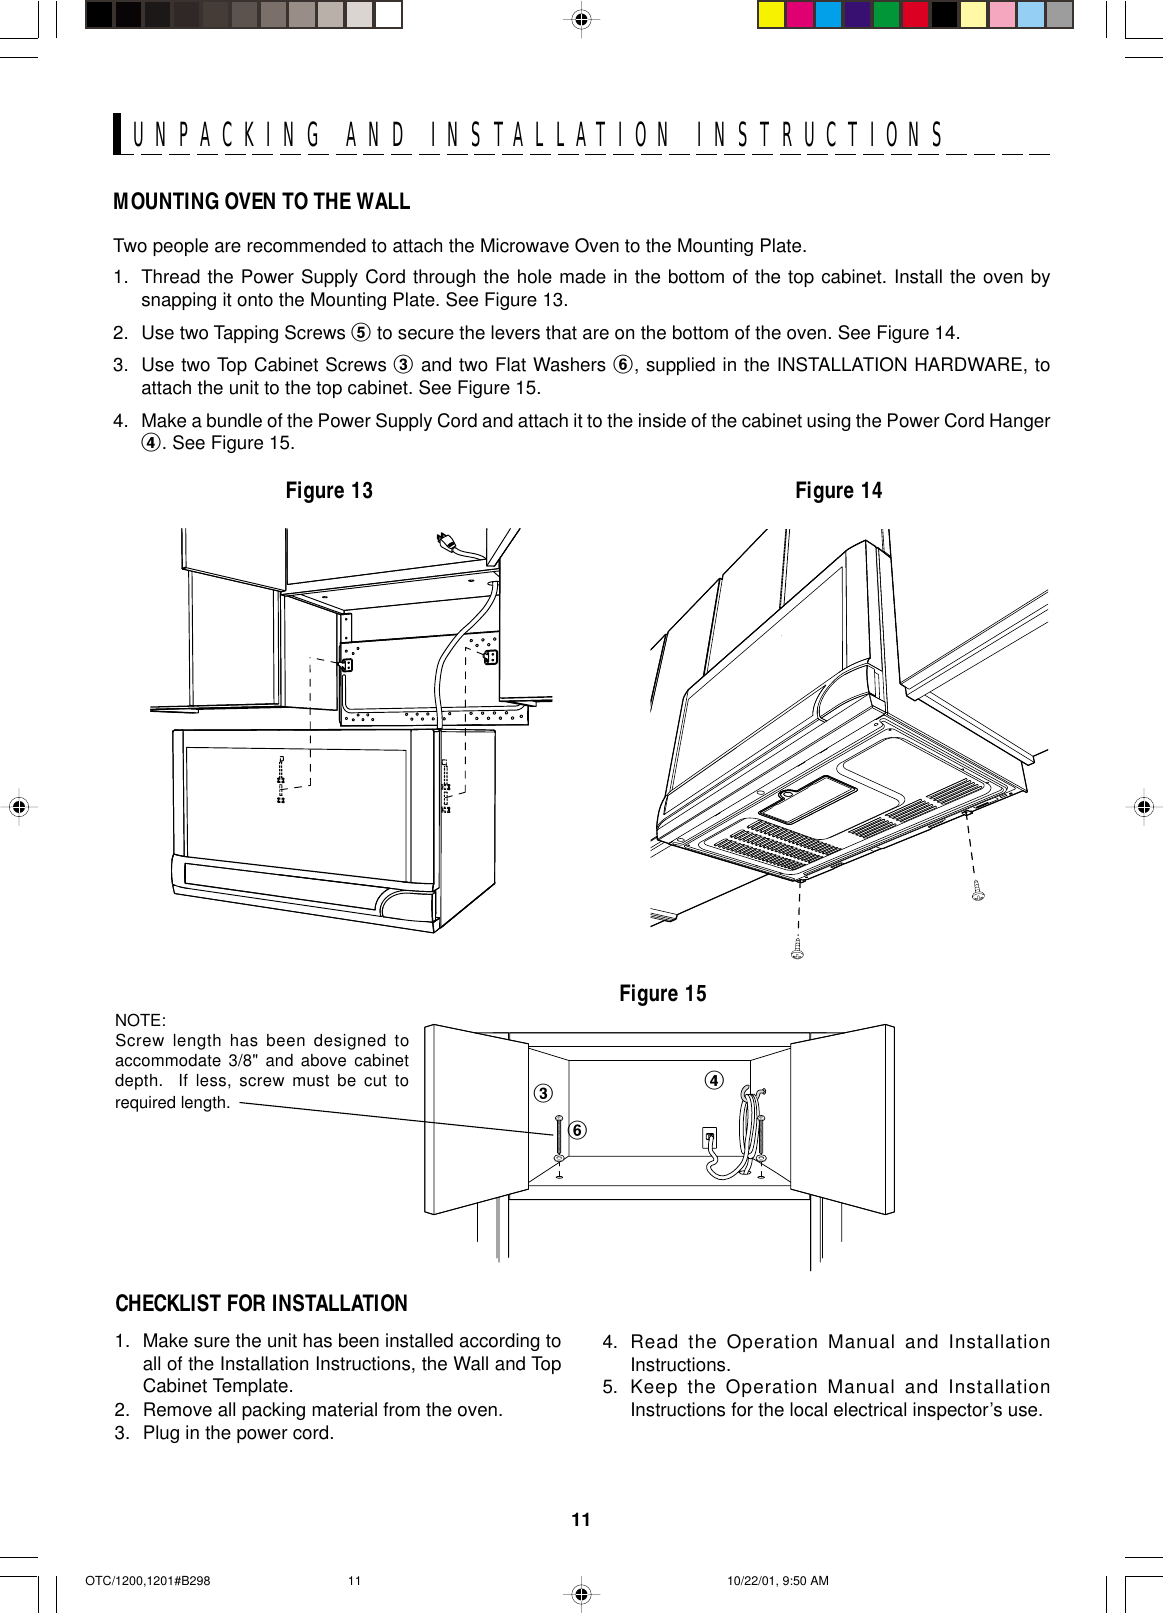 11UNPACKING AND INSTALLATION INSTRUCTIONSMOUNTING OVEN TO THE WALLTwo people are recommended to attach the Microwave Oven to the Mounting Plate.1. Thread the Power Supply Cord through the hole made in the bottom of the top cabinet. Install the oven bysnapping it onto the Mounting Plate. See Figure 13.2. Use two Tapping Screws 5 to secure the levers that are on the bottom of the oven. See Figure 14.3. Use two Top Cabinet Screws 3 and two Flat Washers 6, supplied in the INSTALLATION HARDWARE, toattach the unit to the top cabinet. See Figure 15.4. Make a bundle of the Power Supply Cord and attach it to the inside of the cabinet using the Power Cord Hanger4. See Figure 15.Figure 13 Figure 14Figure 151. Make sure the unit has been installed according toall of the Installation Instructions, the Wall and TopCabinet Template.2. Remove all packing material from the oven.3. Plug in the power cord.CHECKLIST FOR INSTALLATION4. Read the Operation Manual and InstallationInstructions.5. Keep the Operation Manual and InstallationInstructions for the local electrical inspector’s use.346NOTE:Screw length has been designed toaccommodate 3/8&quot; and above cabinetdepth.  If less, screw must be cut torequired length.OTC/1200,1201#B298 10/22/01, 9:50 AM11